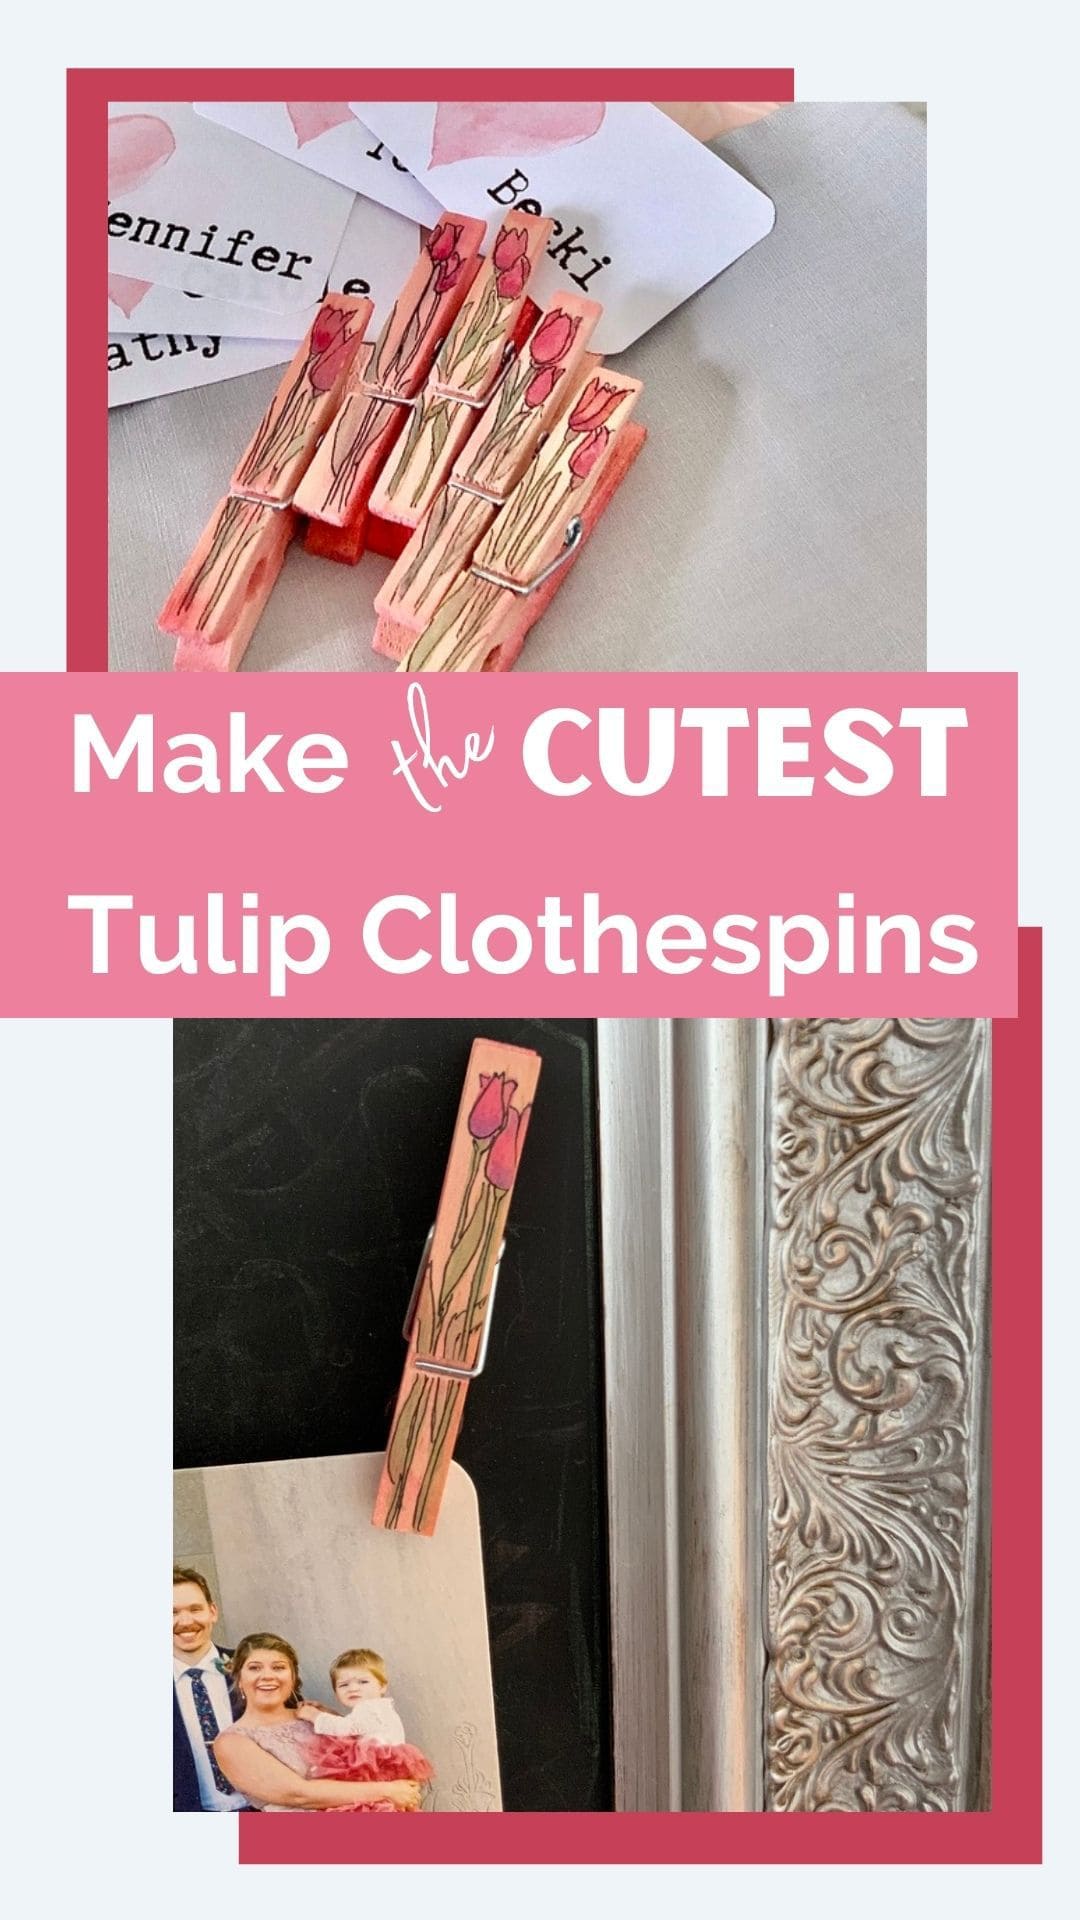 Pin Tower Reminder with two pictures of he finished tulip clothespins